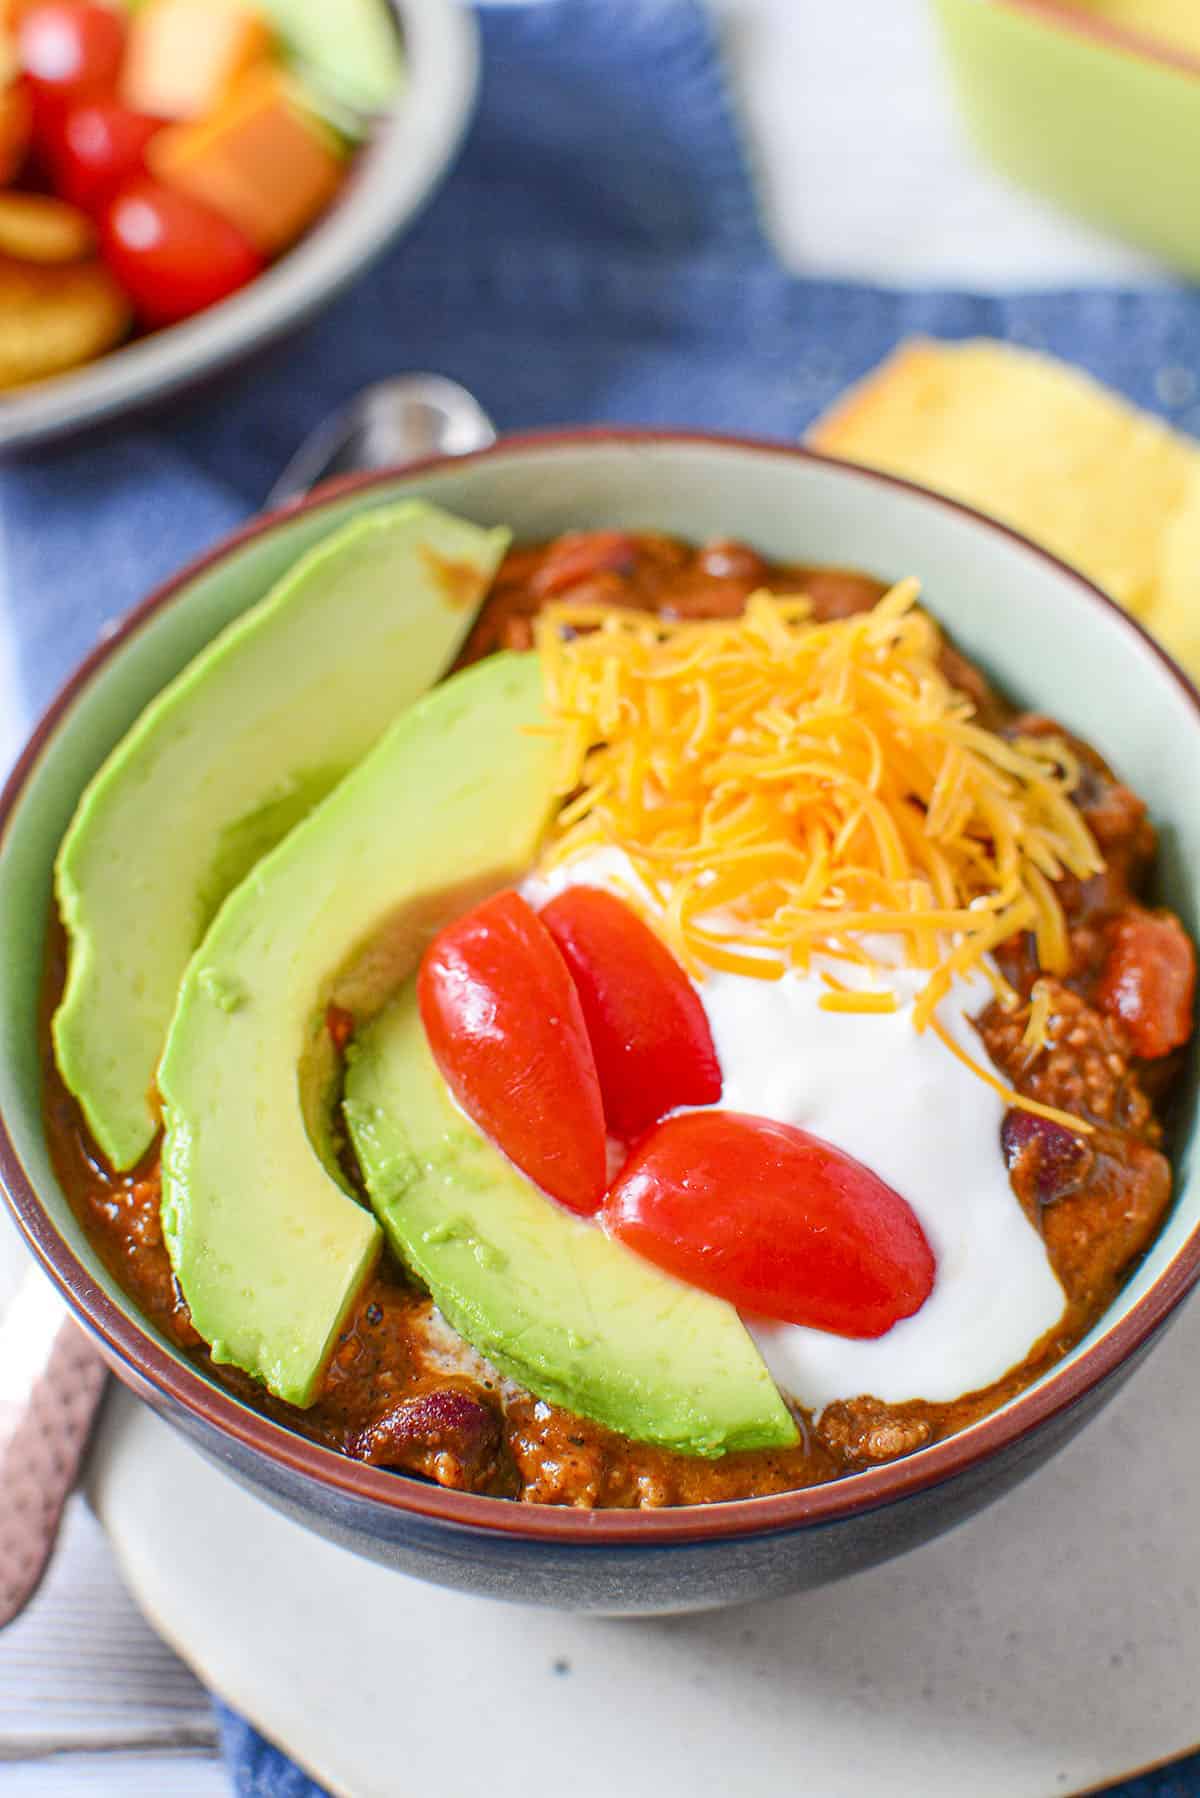 A bowl of chili with avocado, tomatoes, sour cream and cheese.